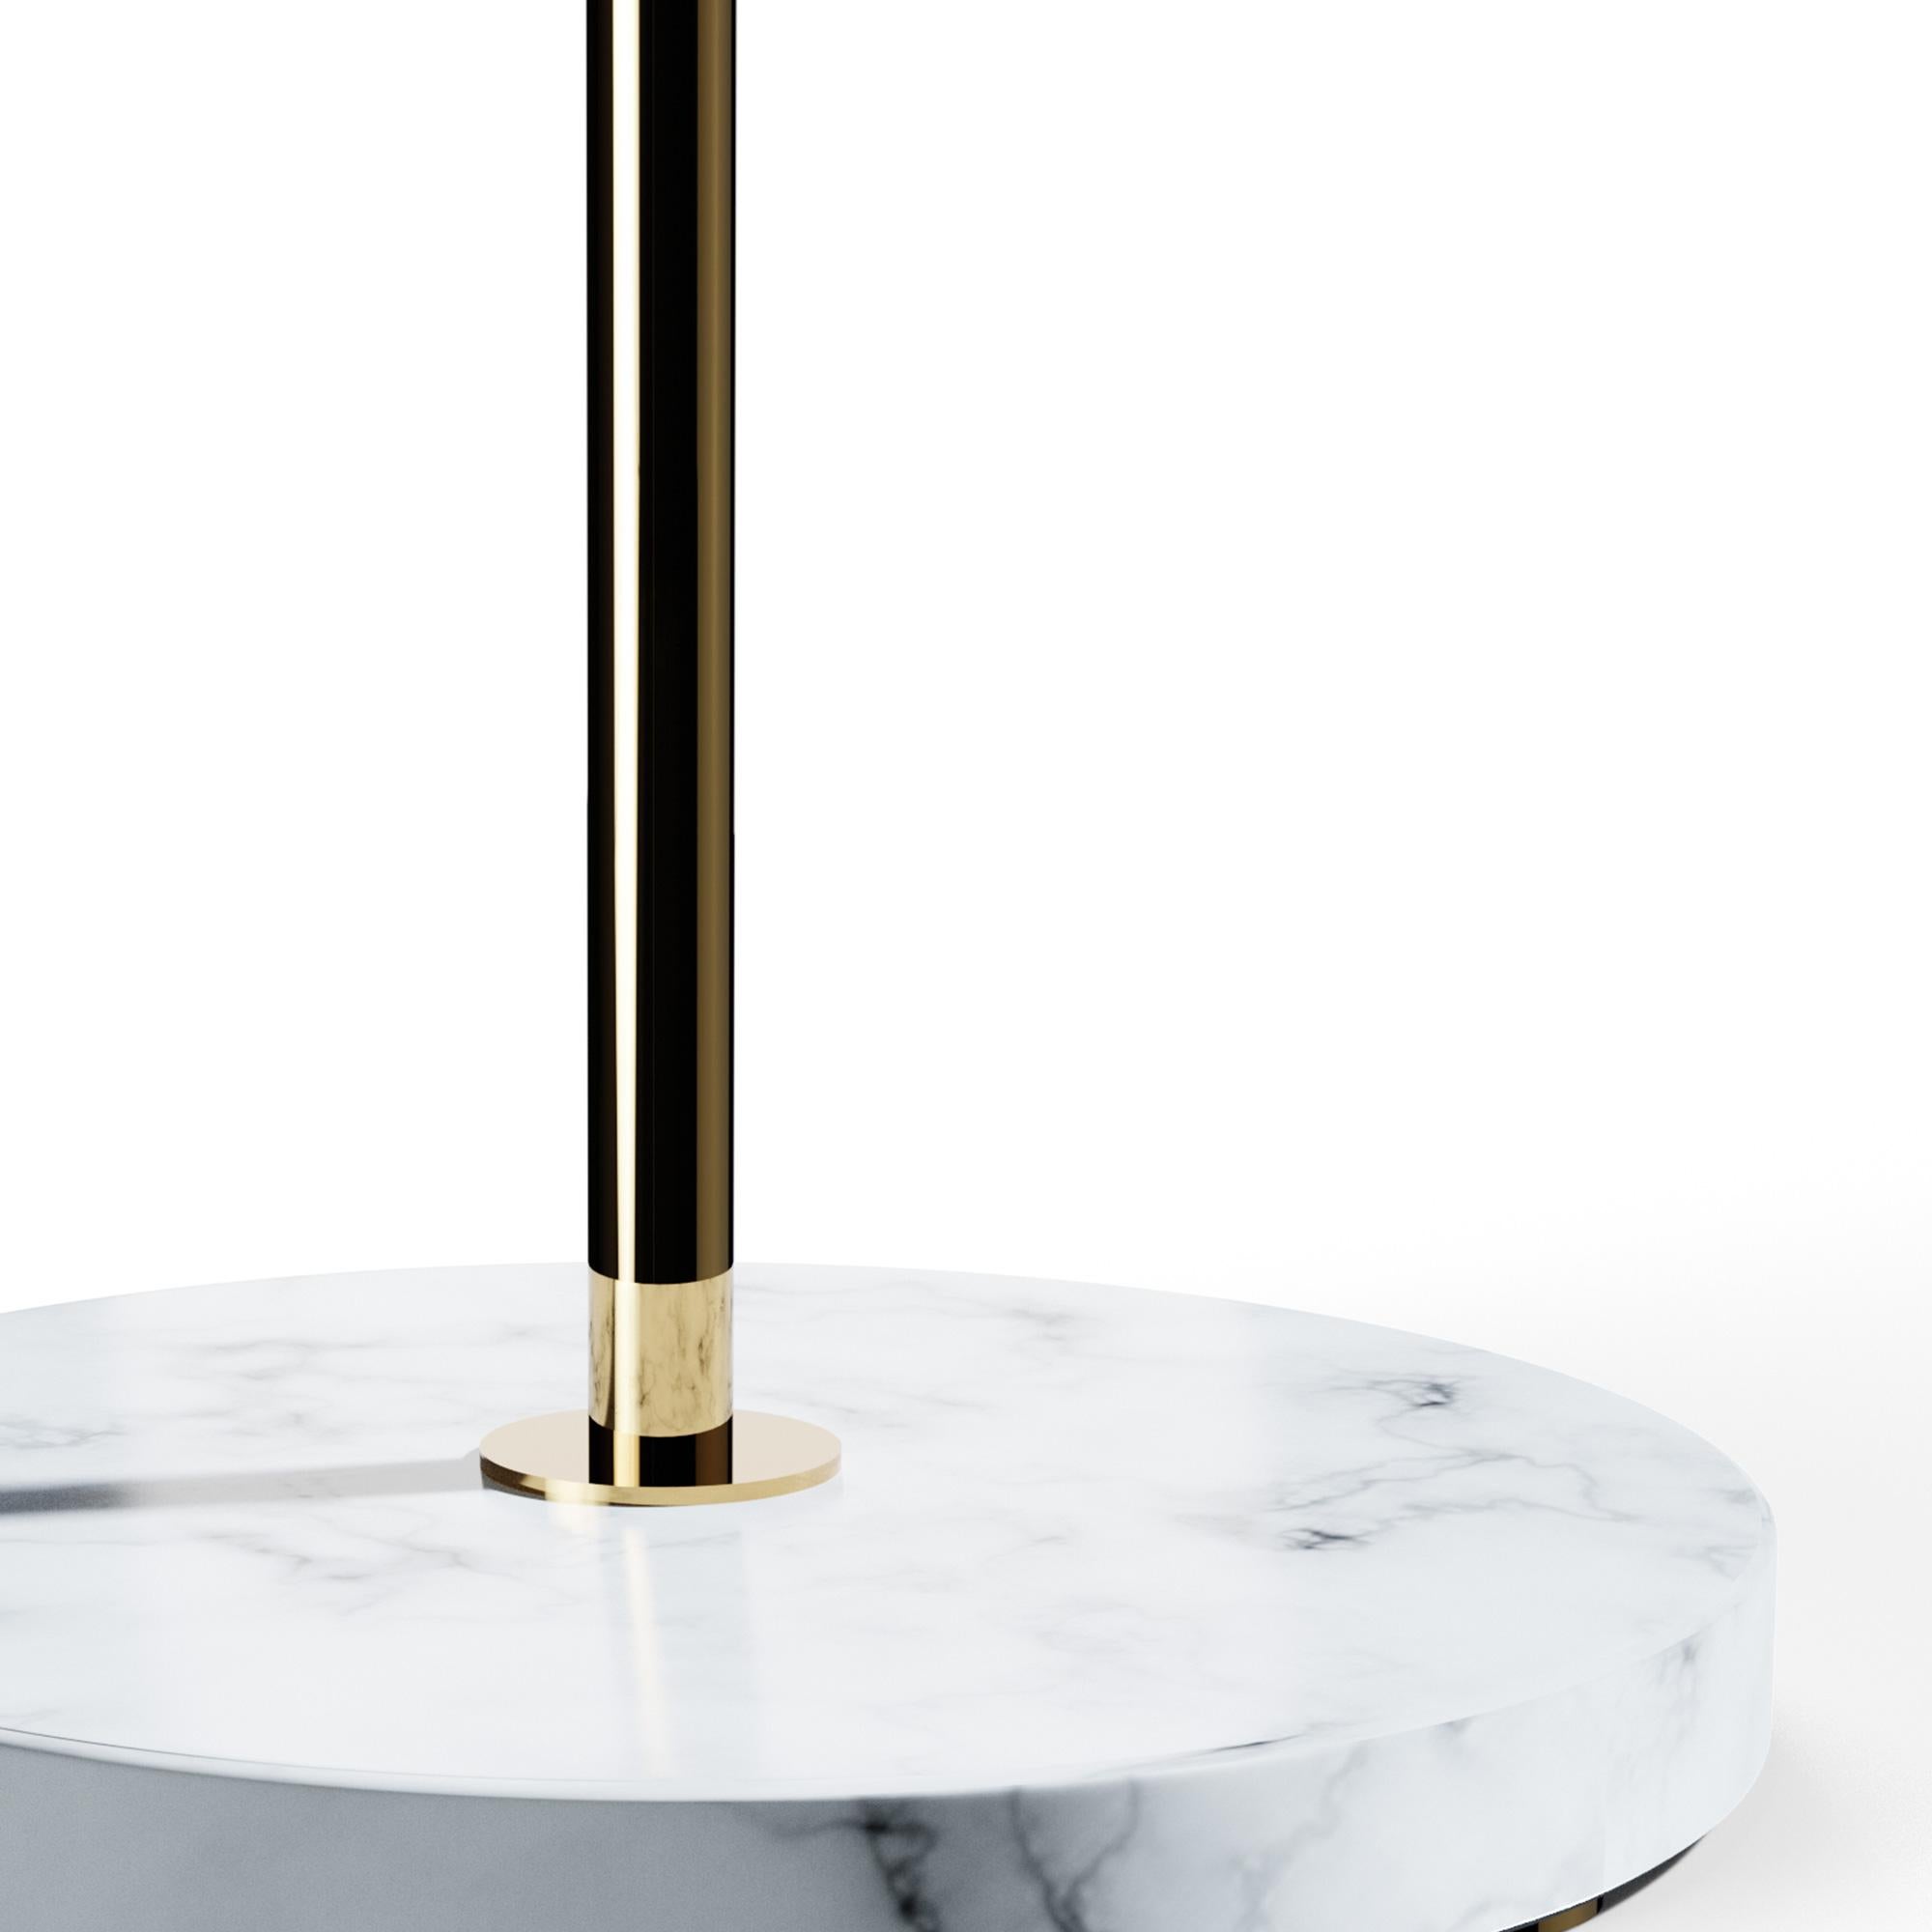 Contemporary Large Joseph-André Motte J14 Floor Lamp in Polished Brass & Marble for Disderot For Sale